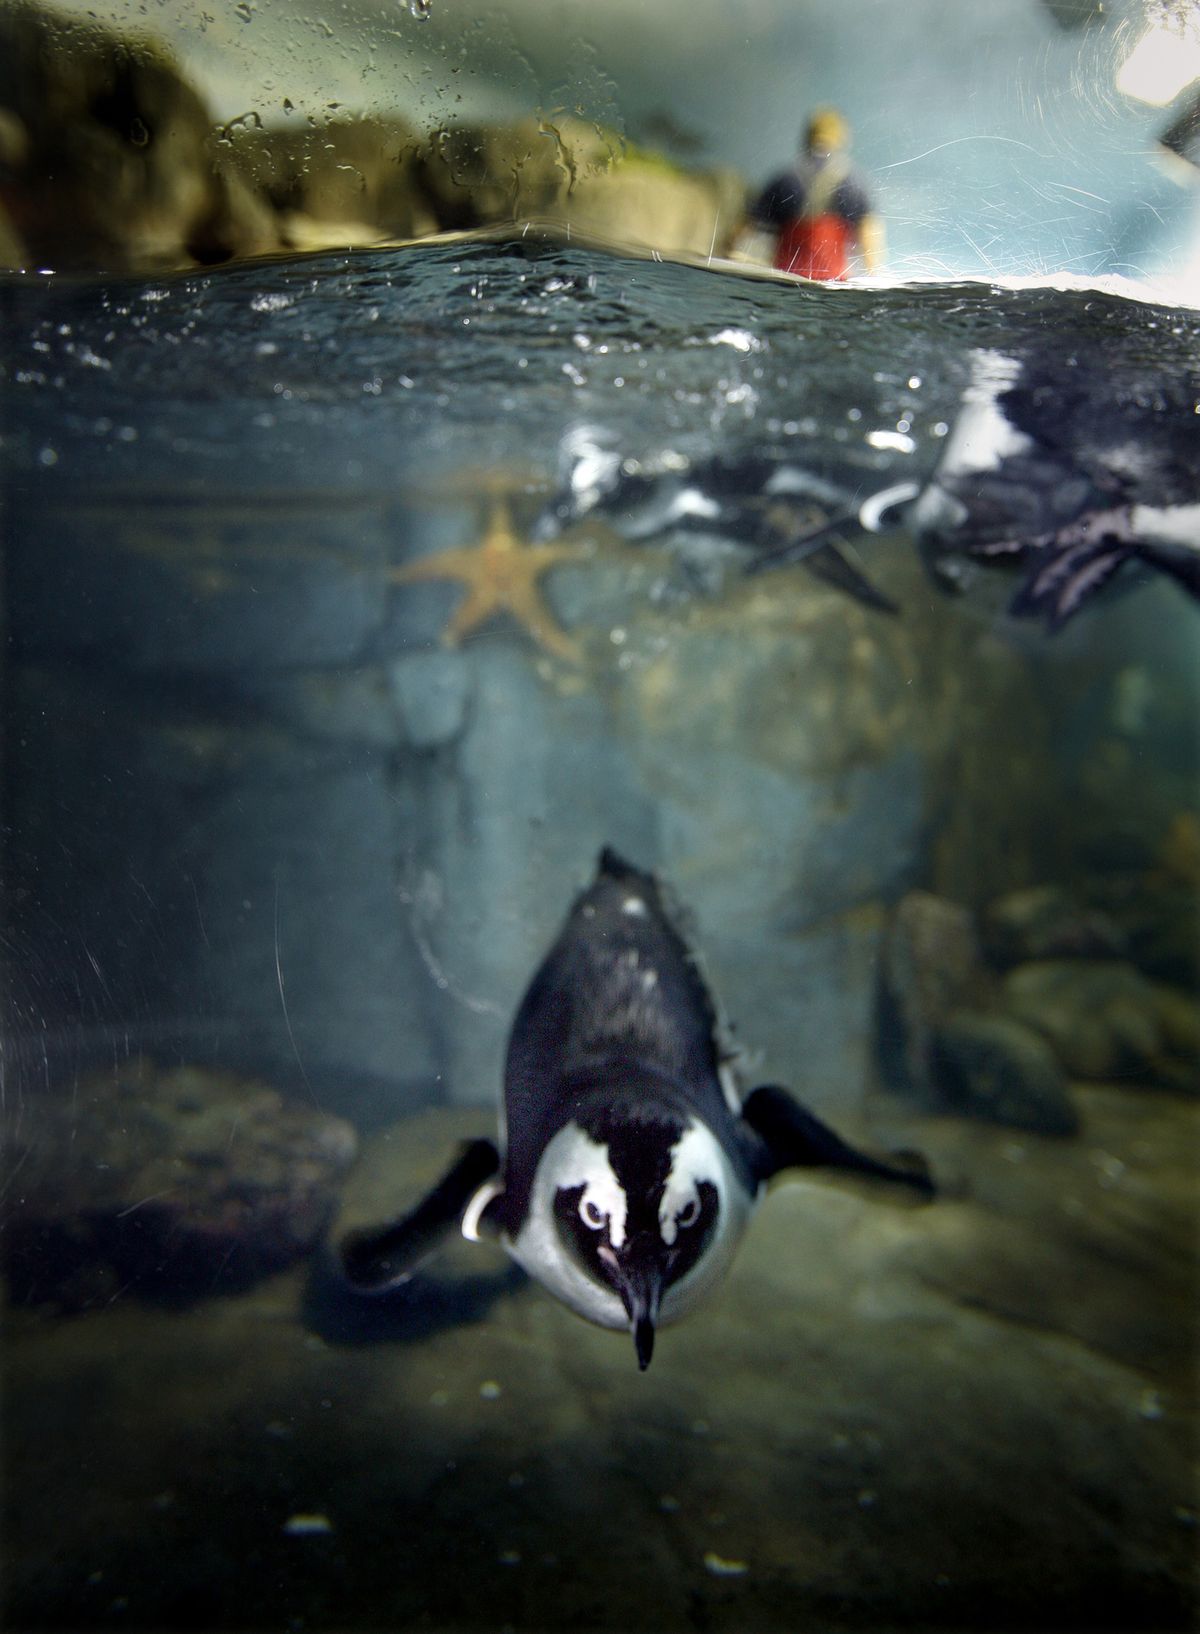 A penguin goes for a swim while its habitat gets an early-morning cleaning at the Monterey Bay Aquarium. The popular tourist destination is celebrating its silver anniversary this year, but for the critters there, it’s just another day at the office. Los Angeles Times (Los Angeles Times)